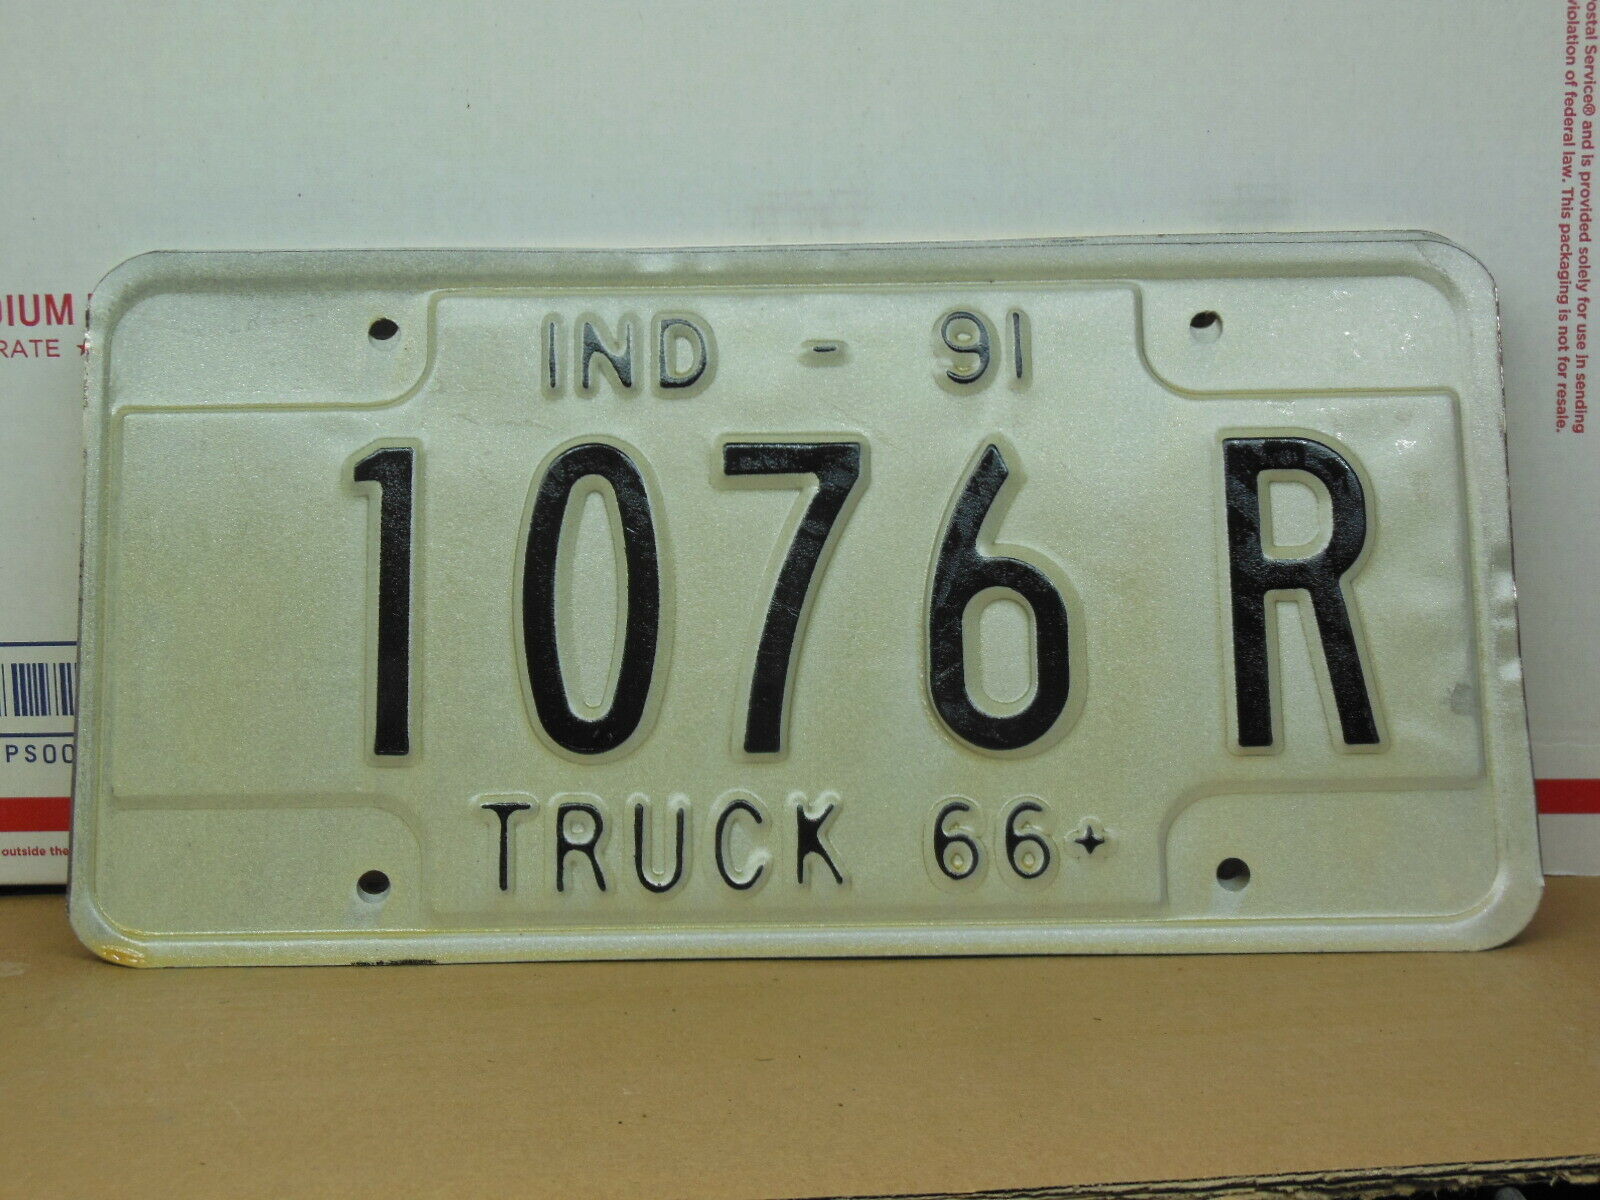 1076 R = NOS 1991 Indiana Truck 66+ License Plate       Try My Combined Shipping